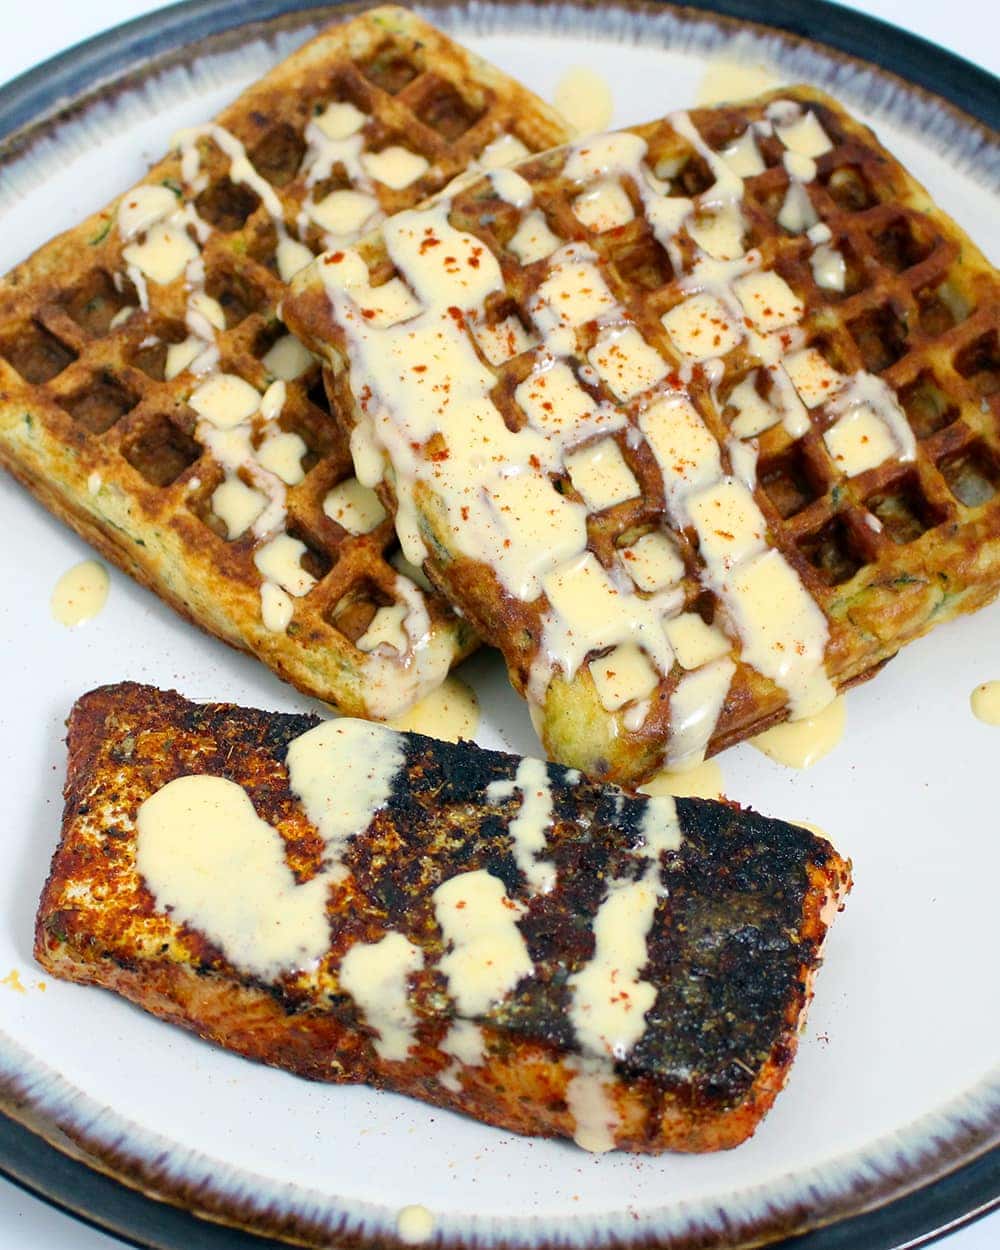 Spicy salmon is the perfect complement to these tasty courgette waffles. Top everything with this super quick, creamy hollandaise sauce!